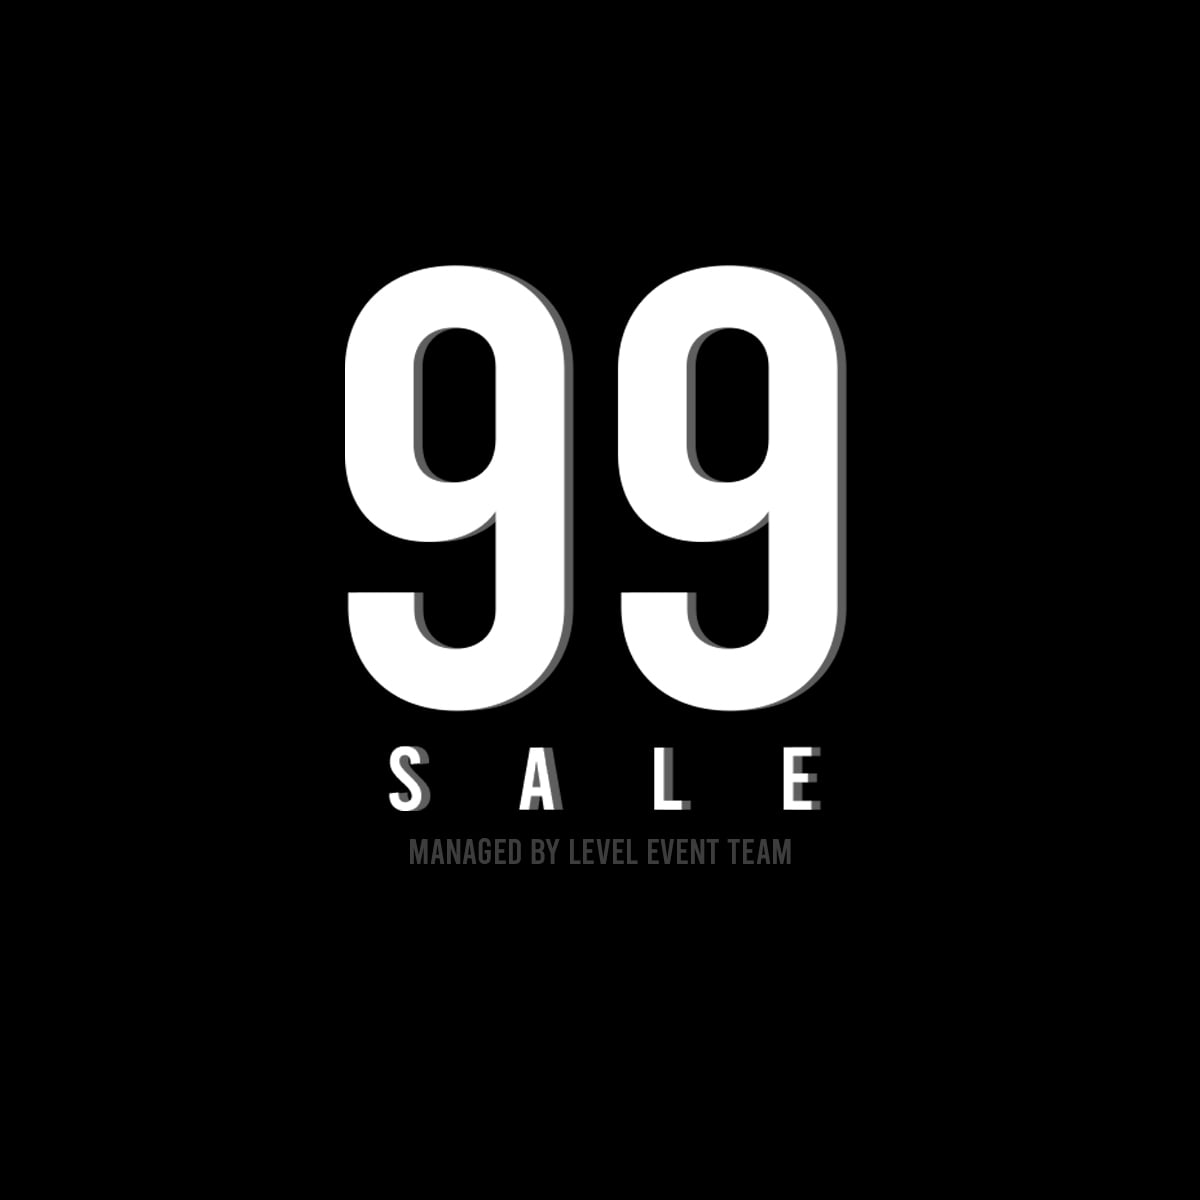 FROM WISHLIST TO CART: GET READY TO SHOP THE 99 SALE!